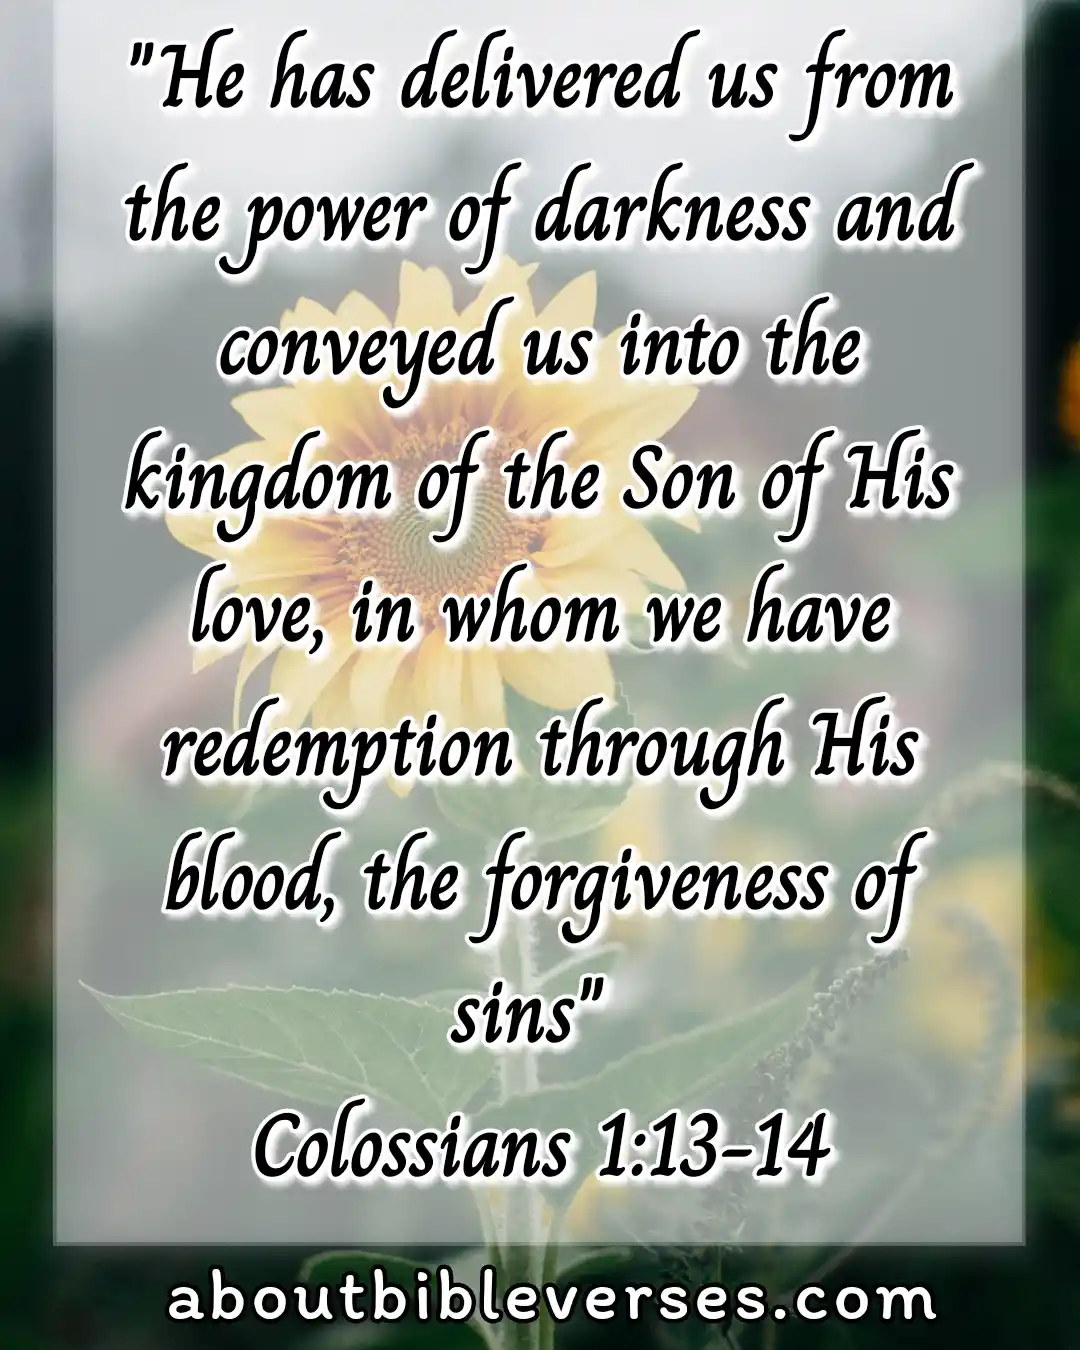 Bible Verses For Reconciliation And Forgiveness (Colossians 1:13-14)